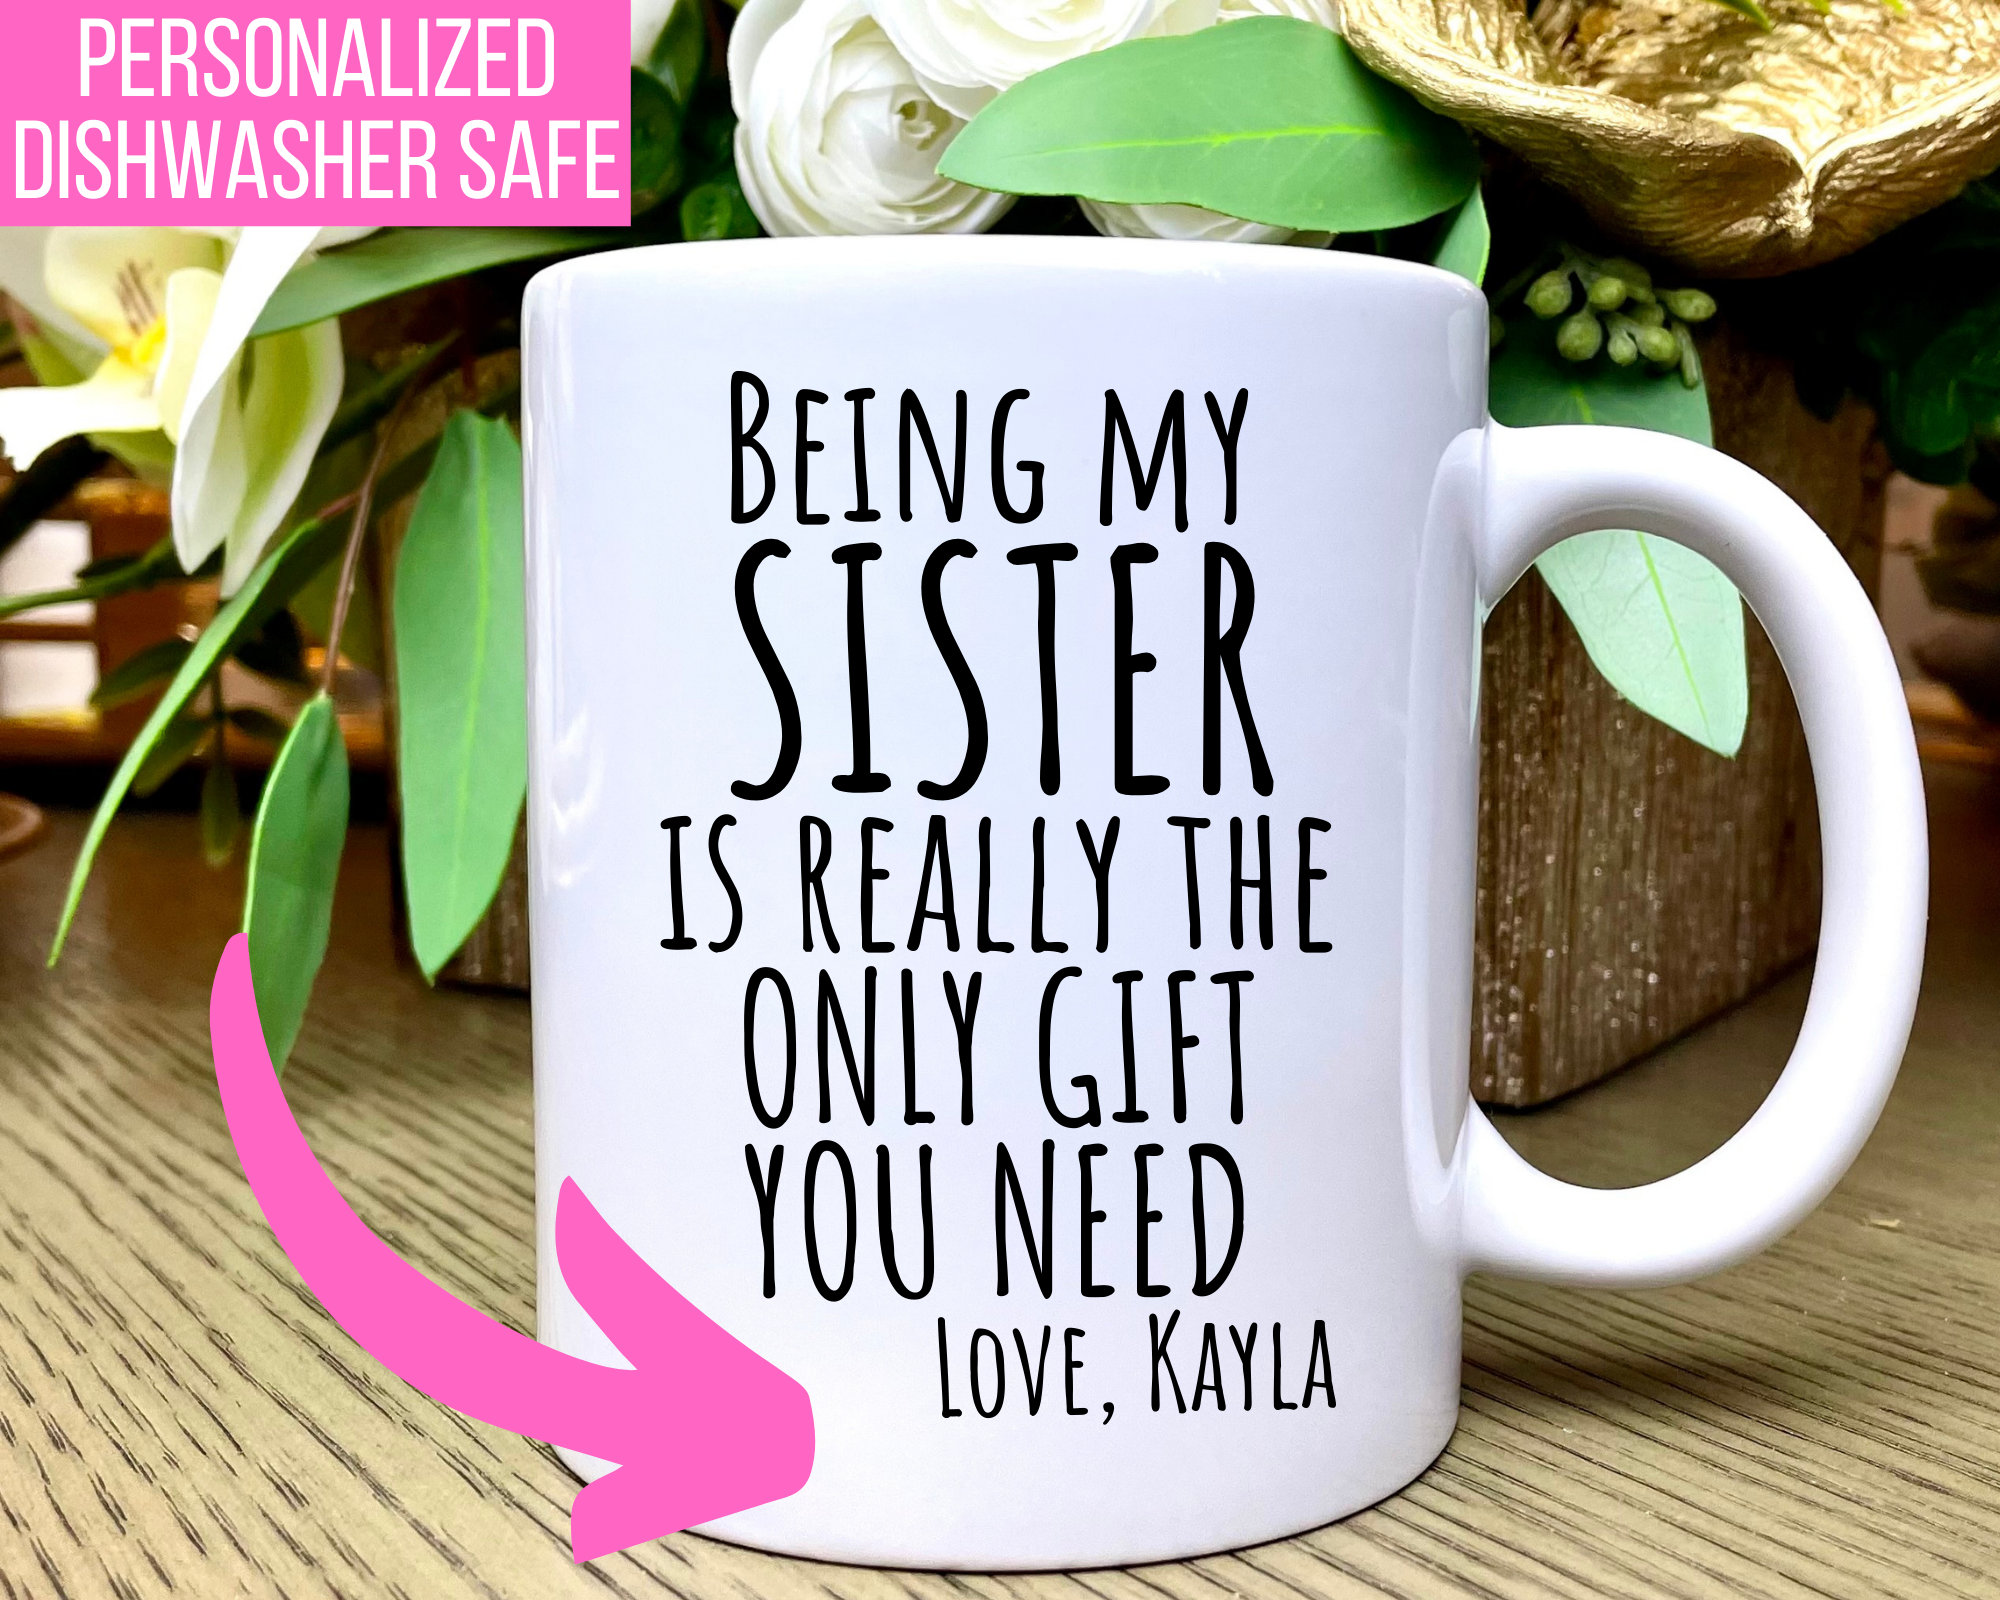 You Are Loved - Cute Coffee Mug for Women - White 14 oz Large Coffee C –  Brooke & Jess Designs - 2 Sisters Helping You Celebrate Your Favorite People